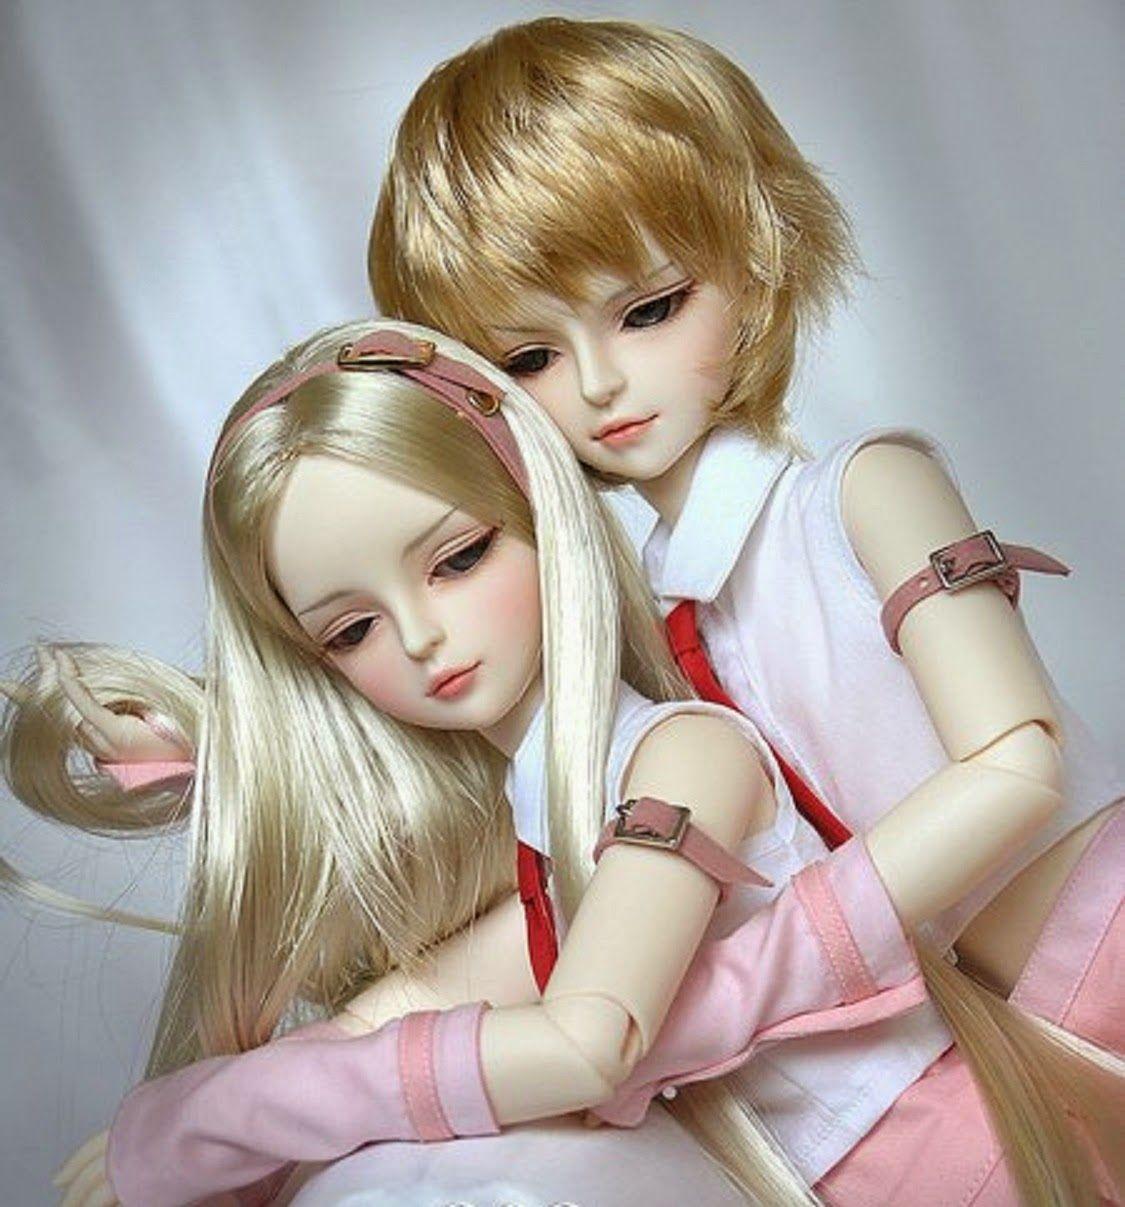 Doll Couple Wallpapers.